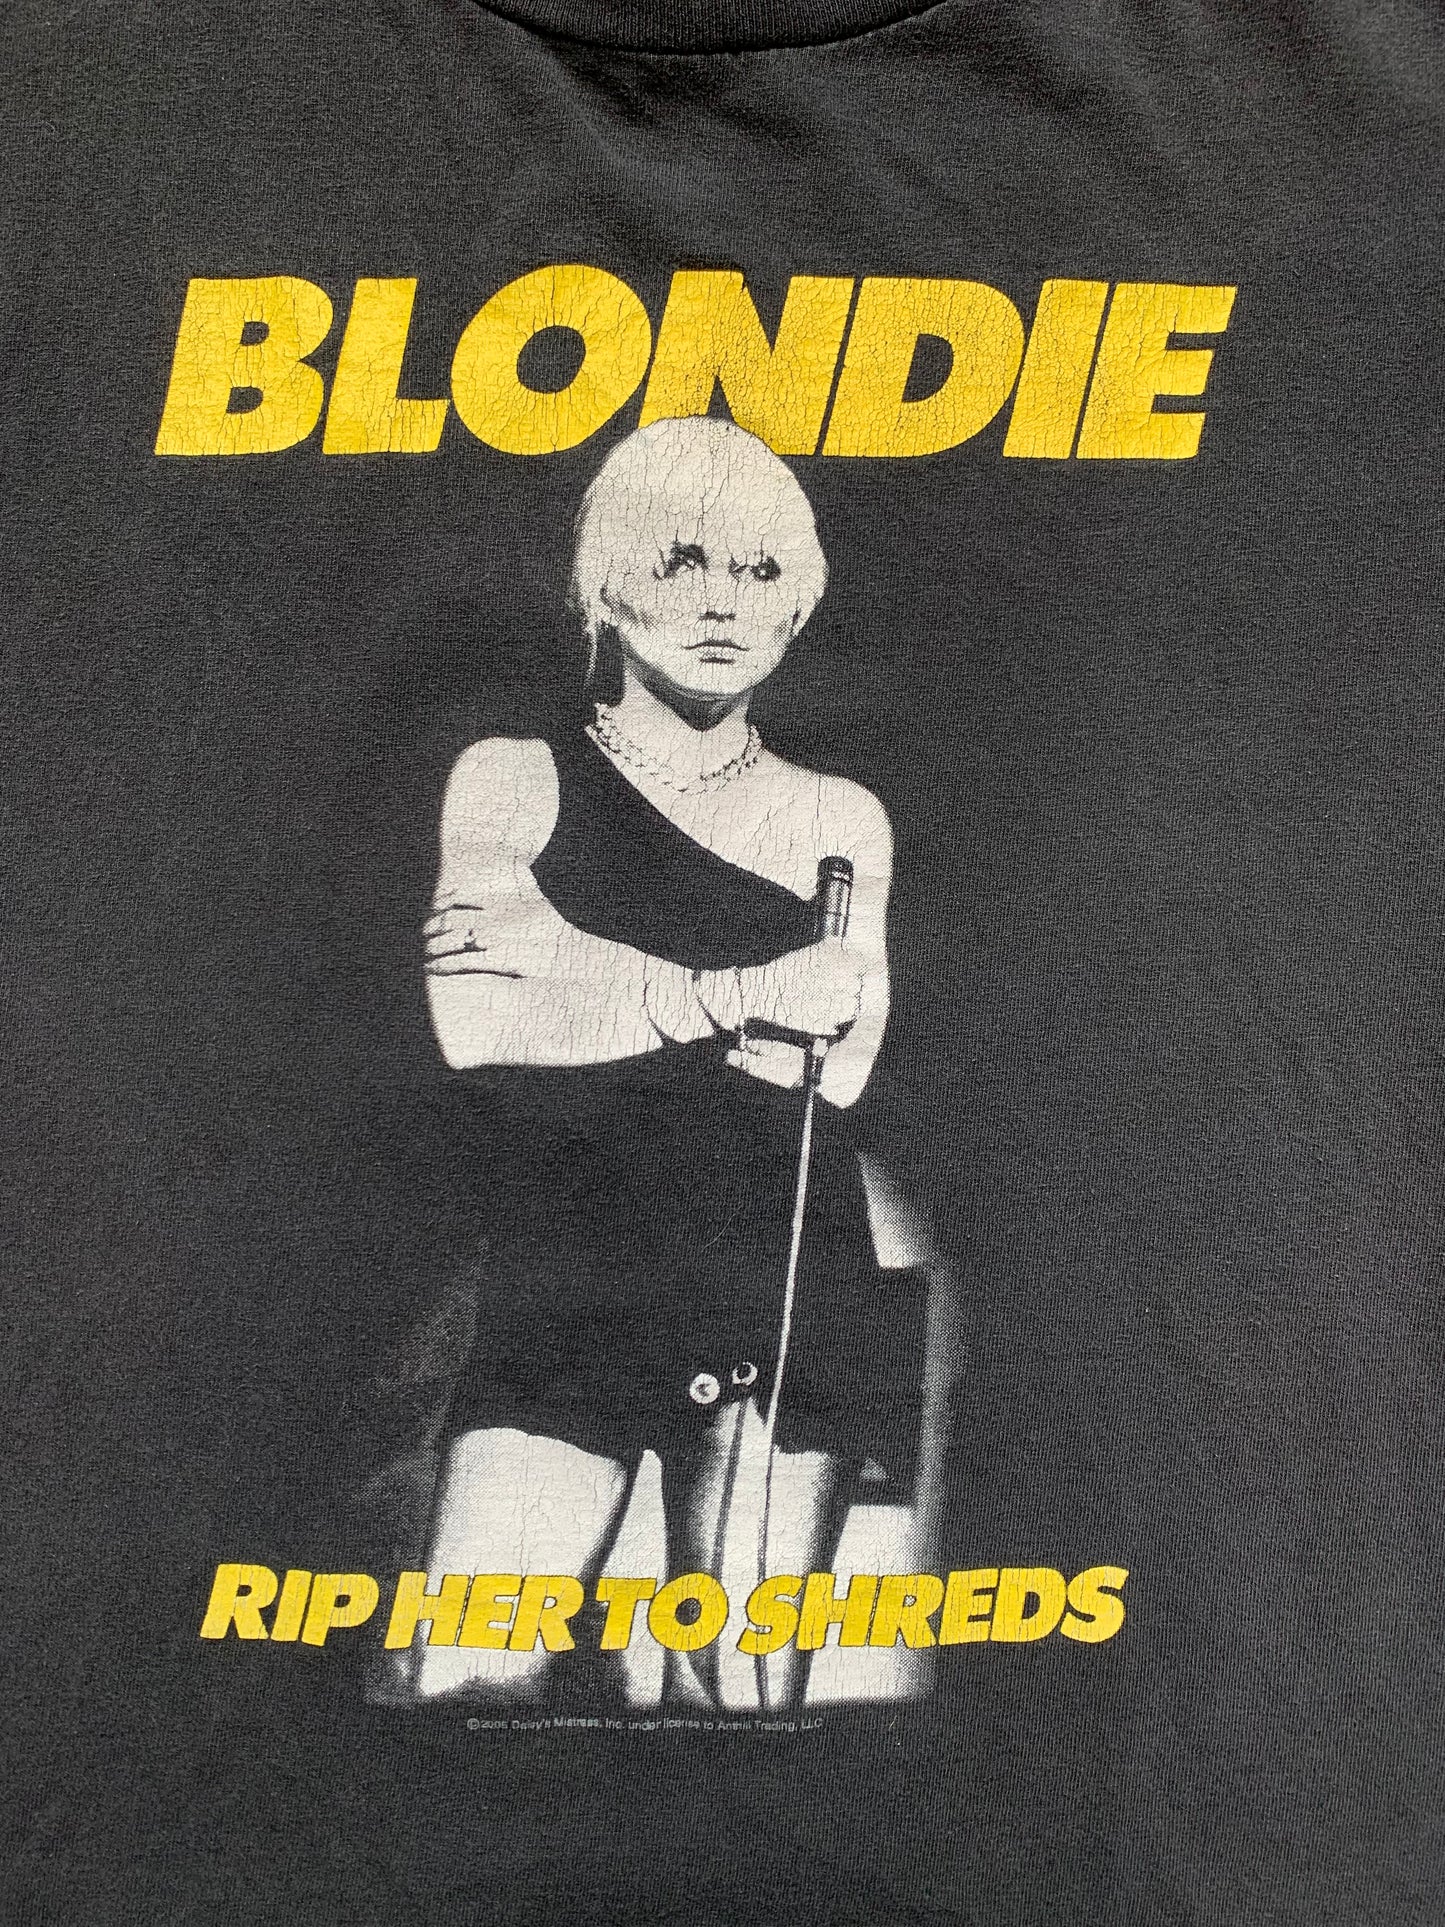 2005 Blondie “Rip Her to Shreds” T-Shirt